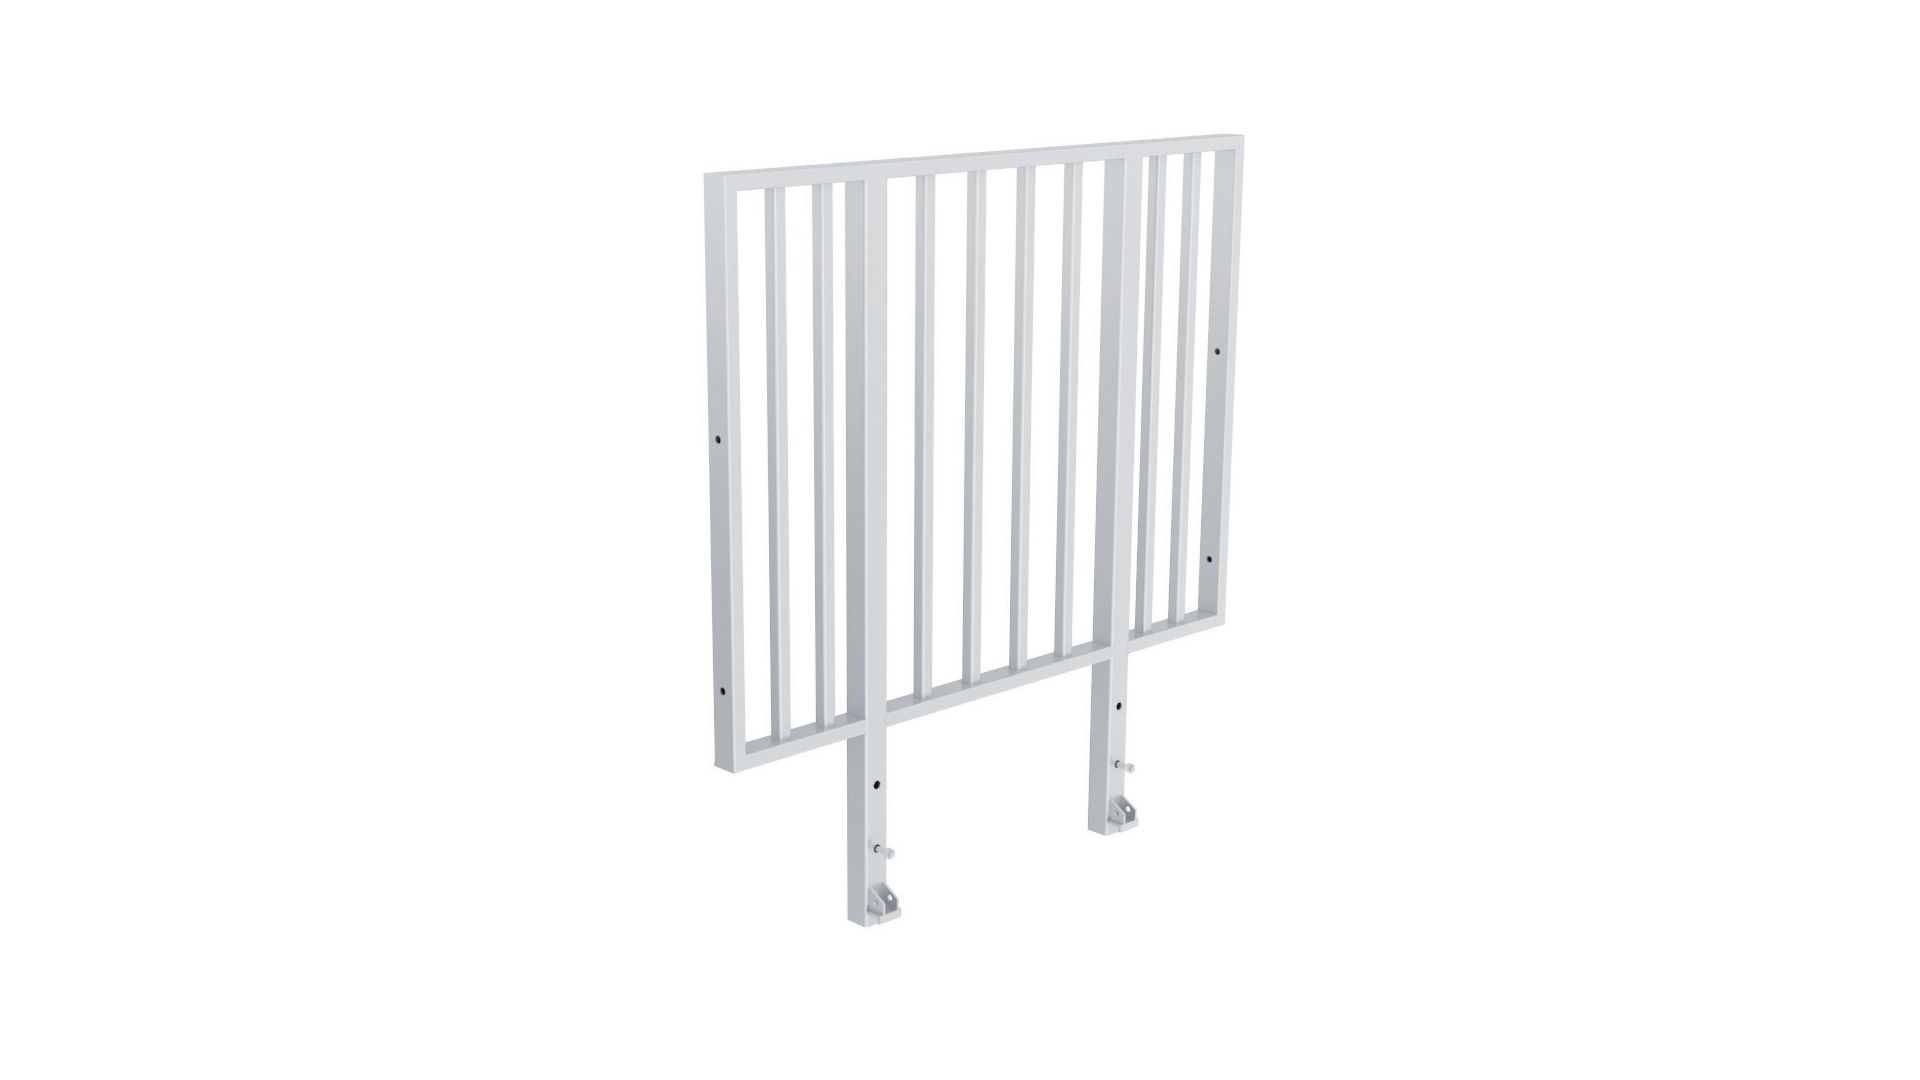 4ft Handrail with vertical bars